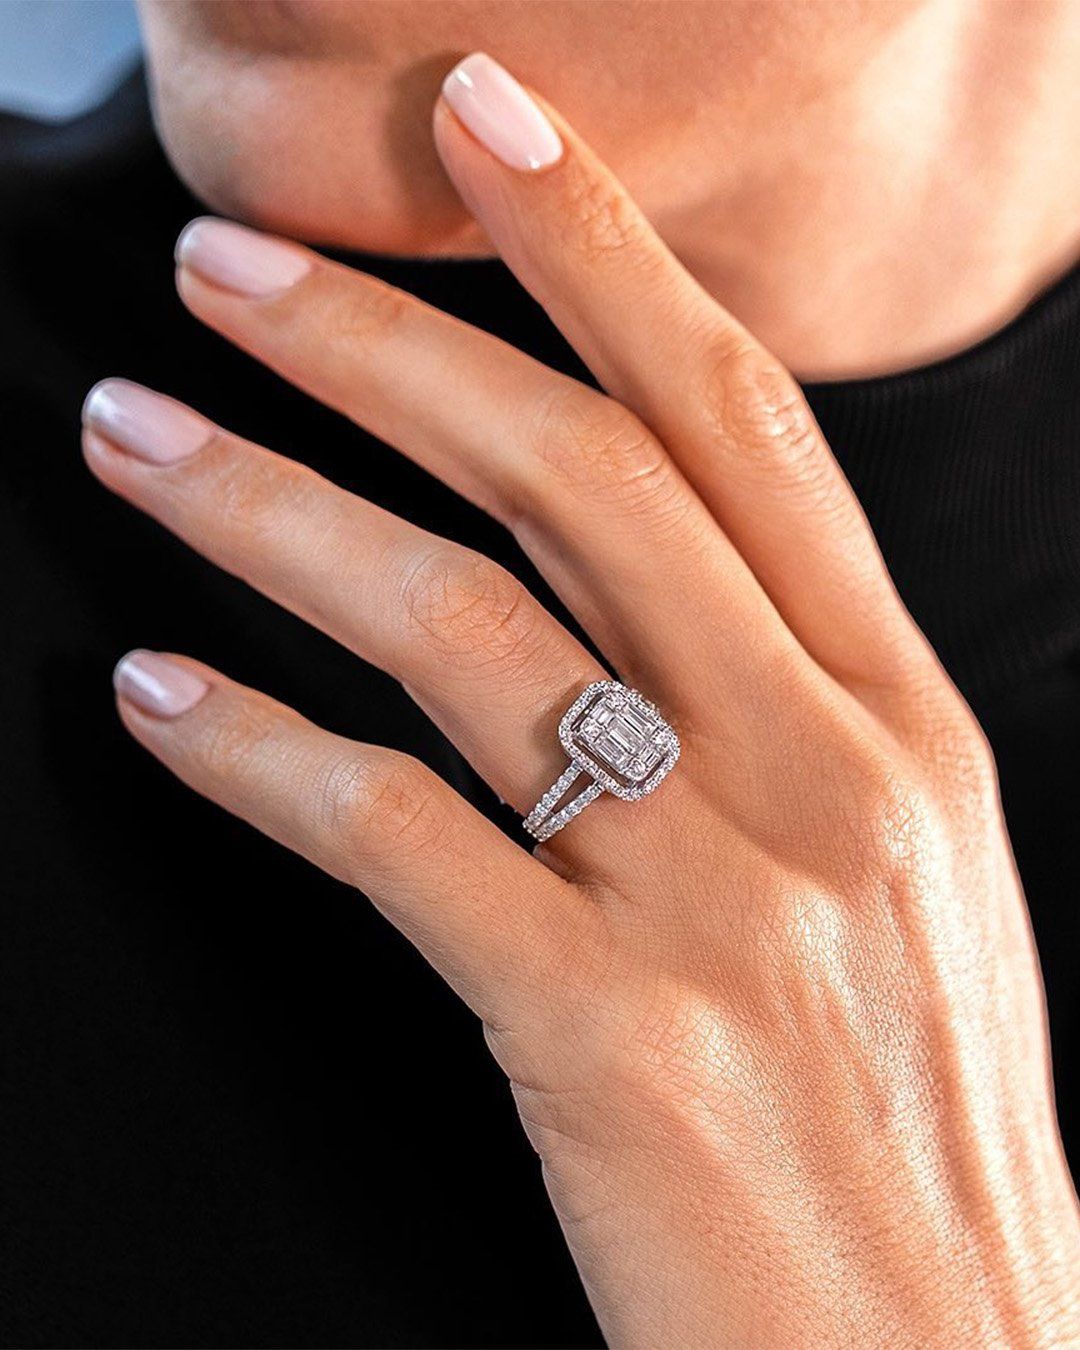 Important points to remember before buying diamond rings